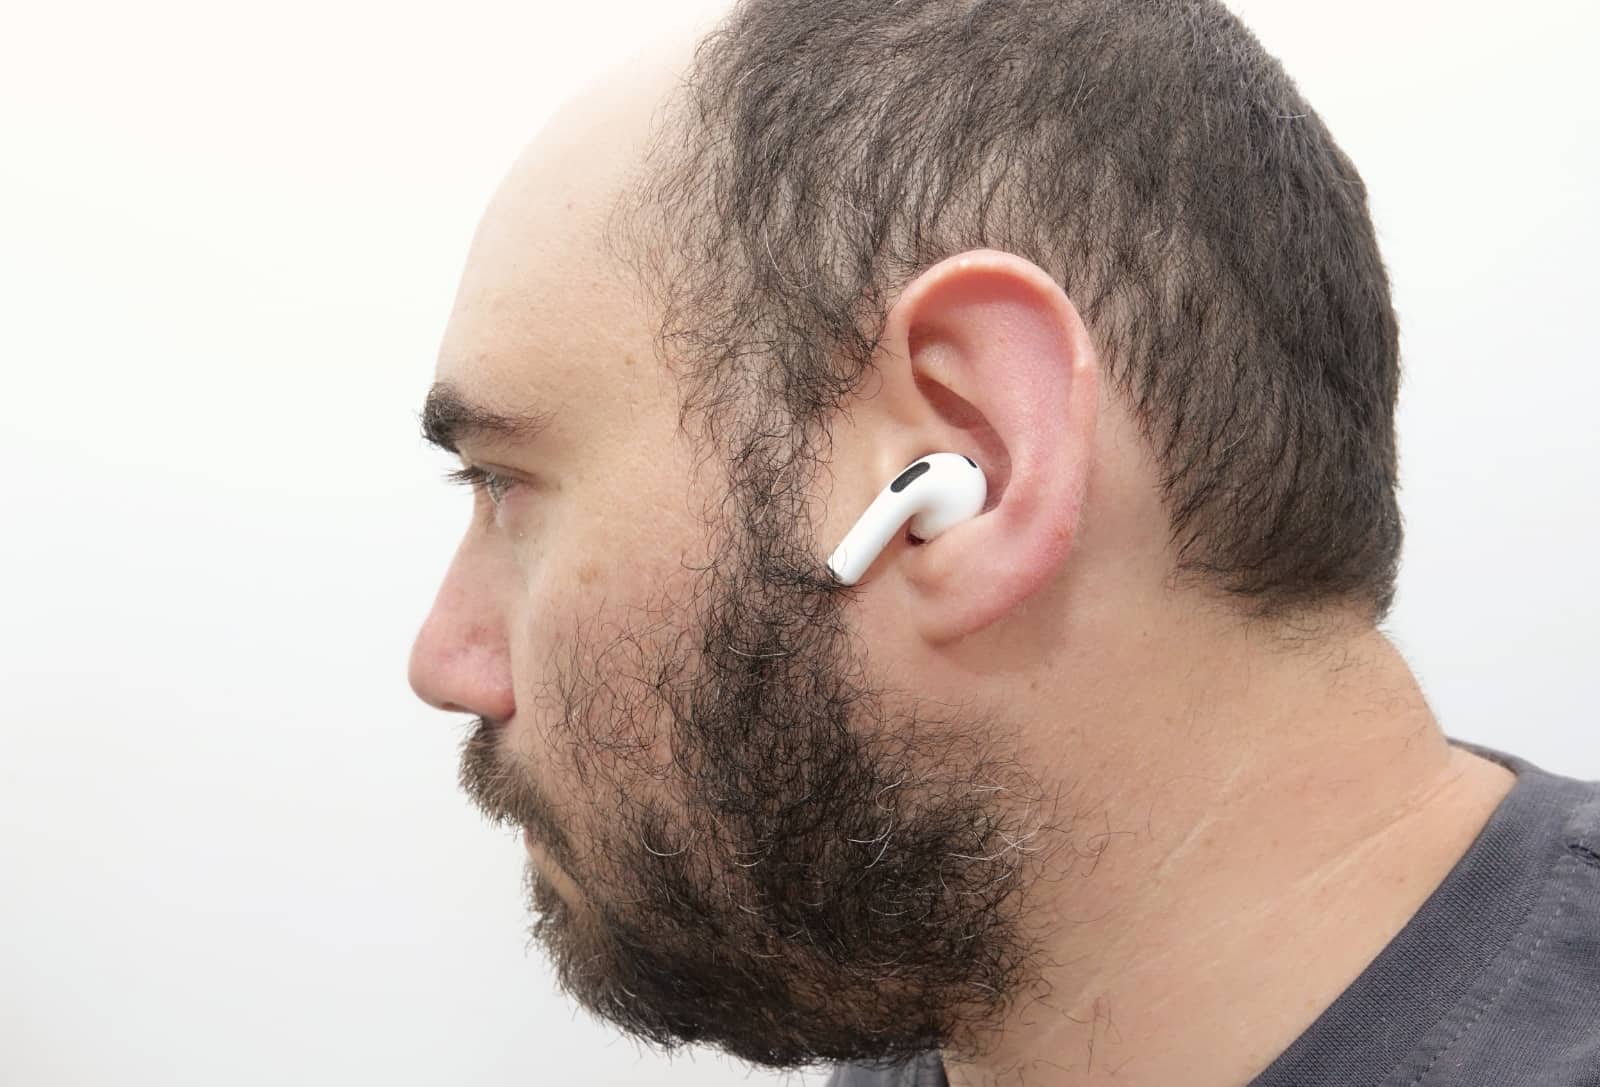 Wearing the AirPods 3rd gen